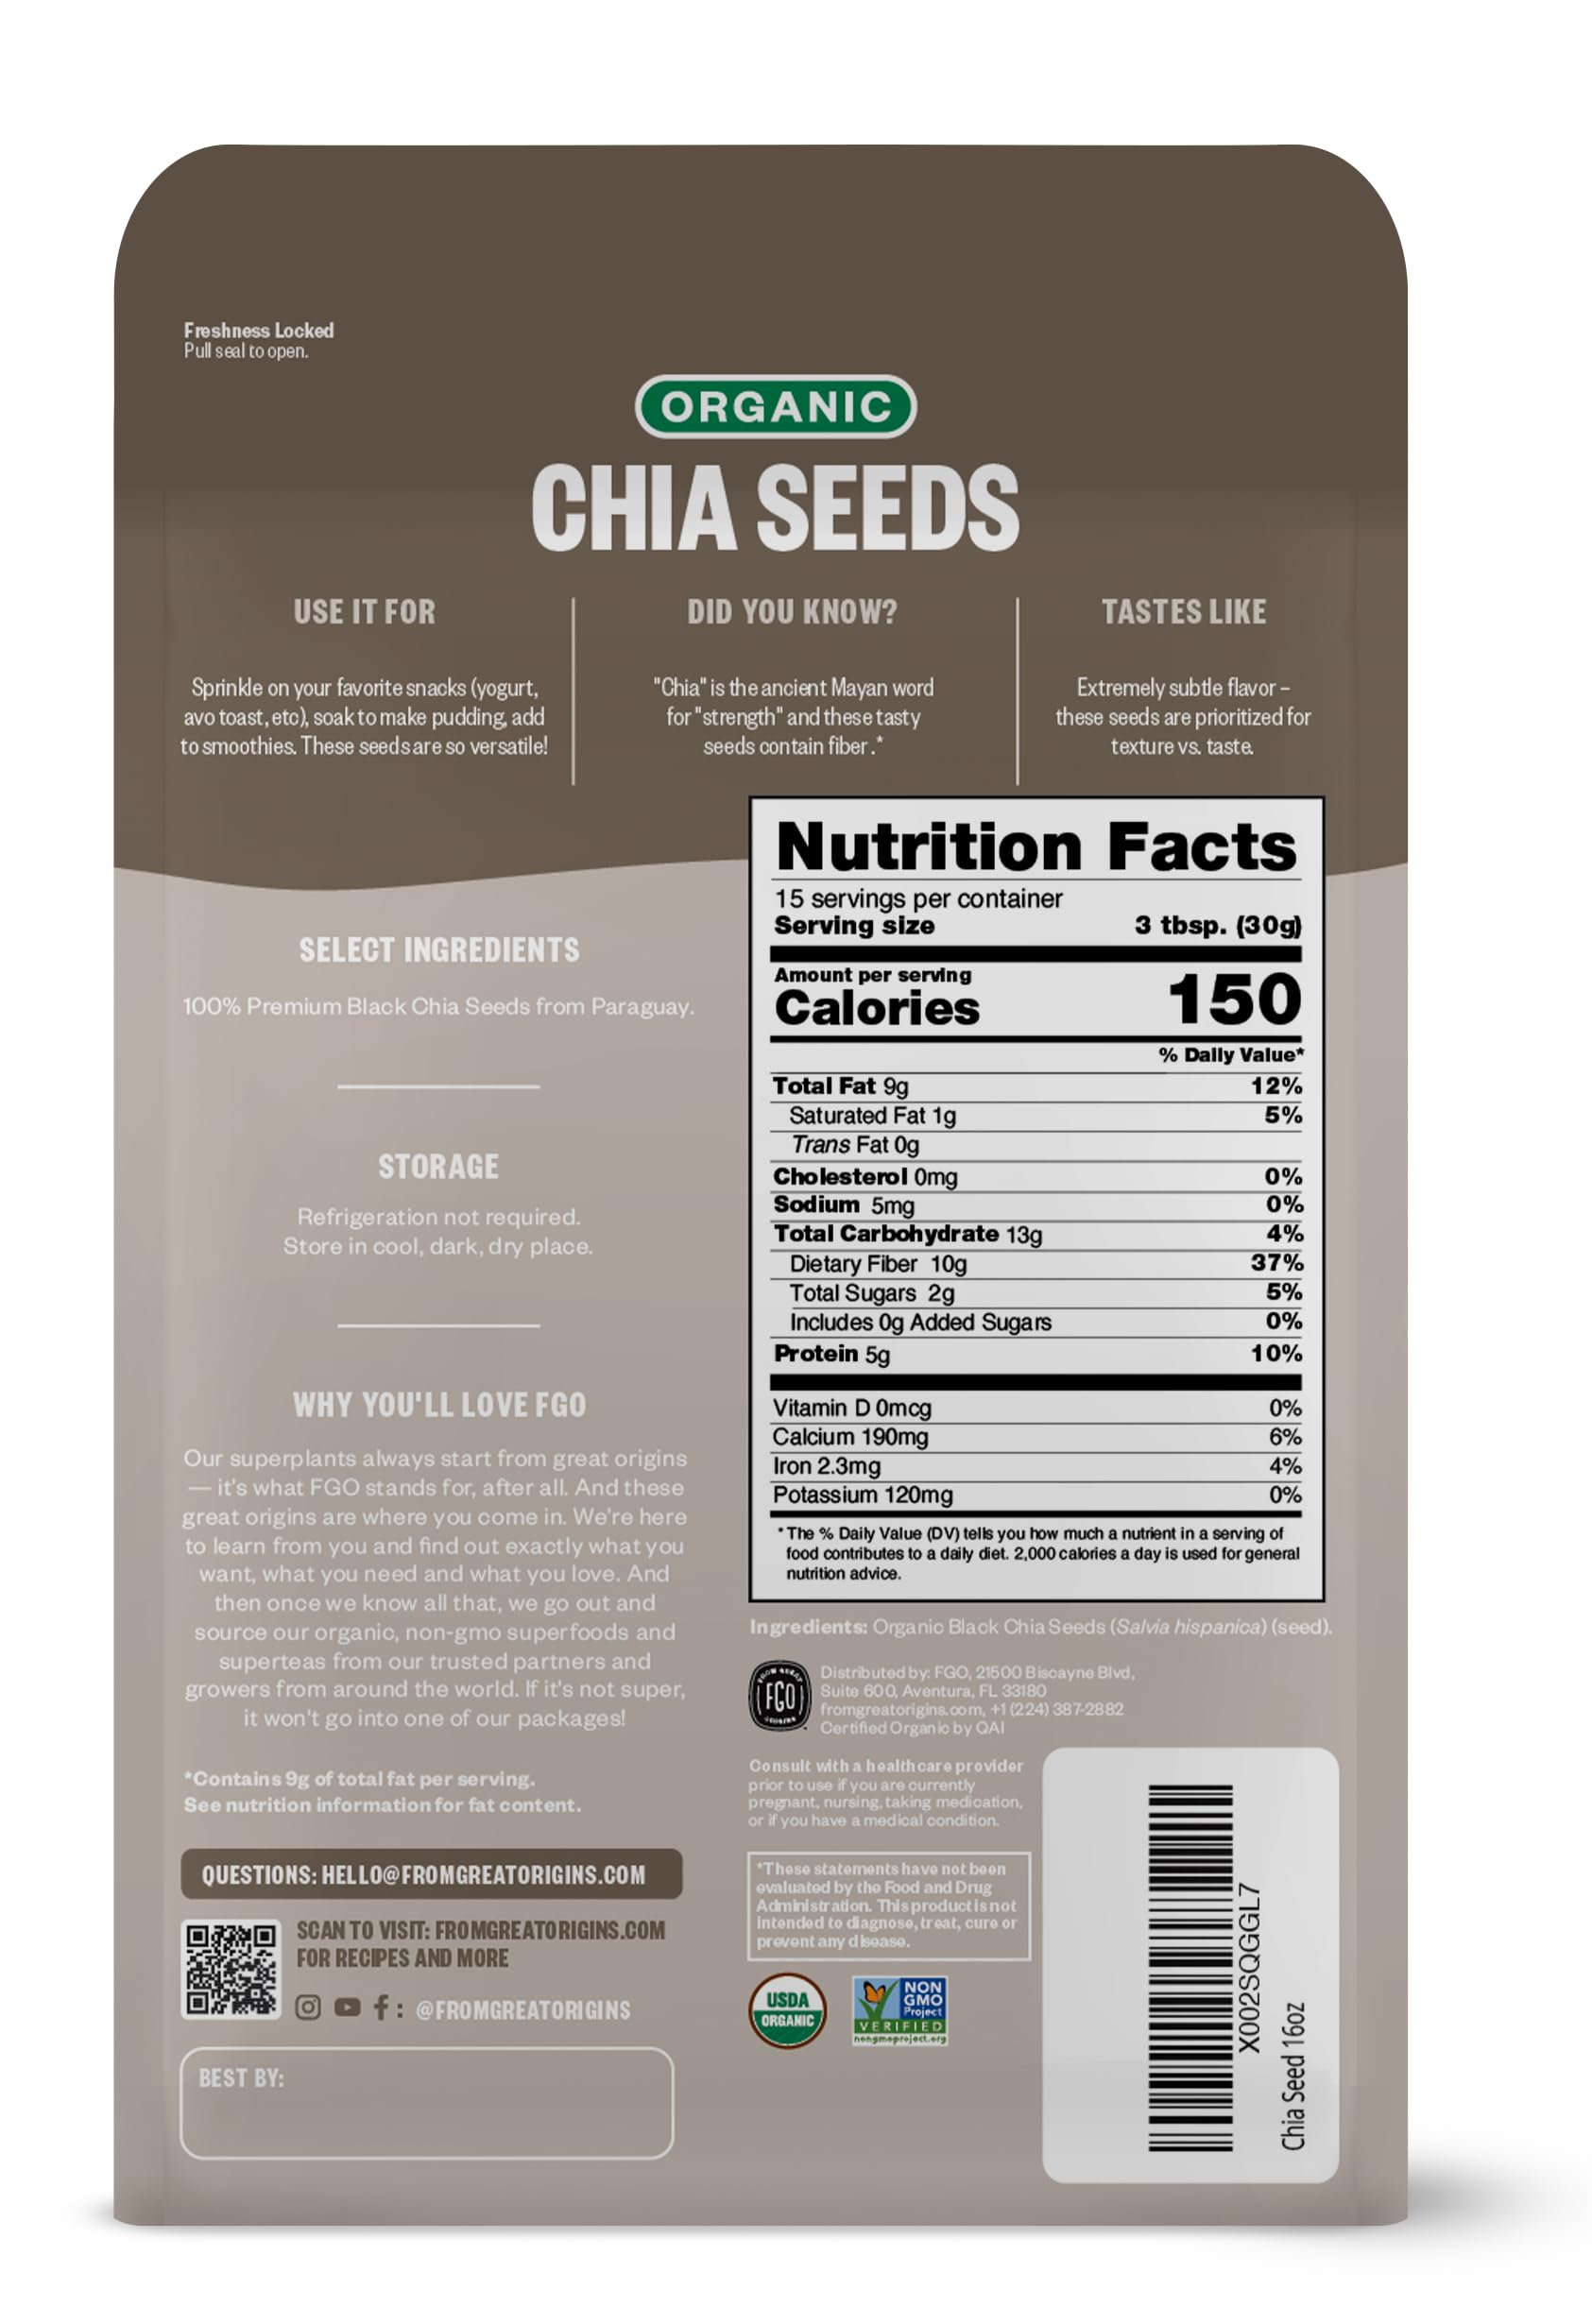 FGO Organic Chia Seeds, Sourced from Paraguay, 16oz, Packaging May Vary (Pack of 1)